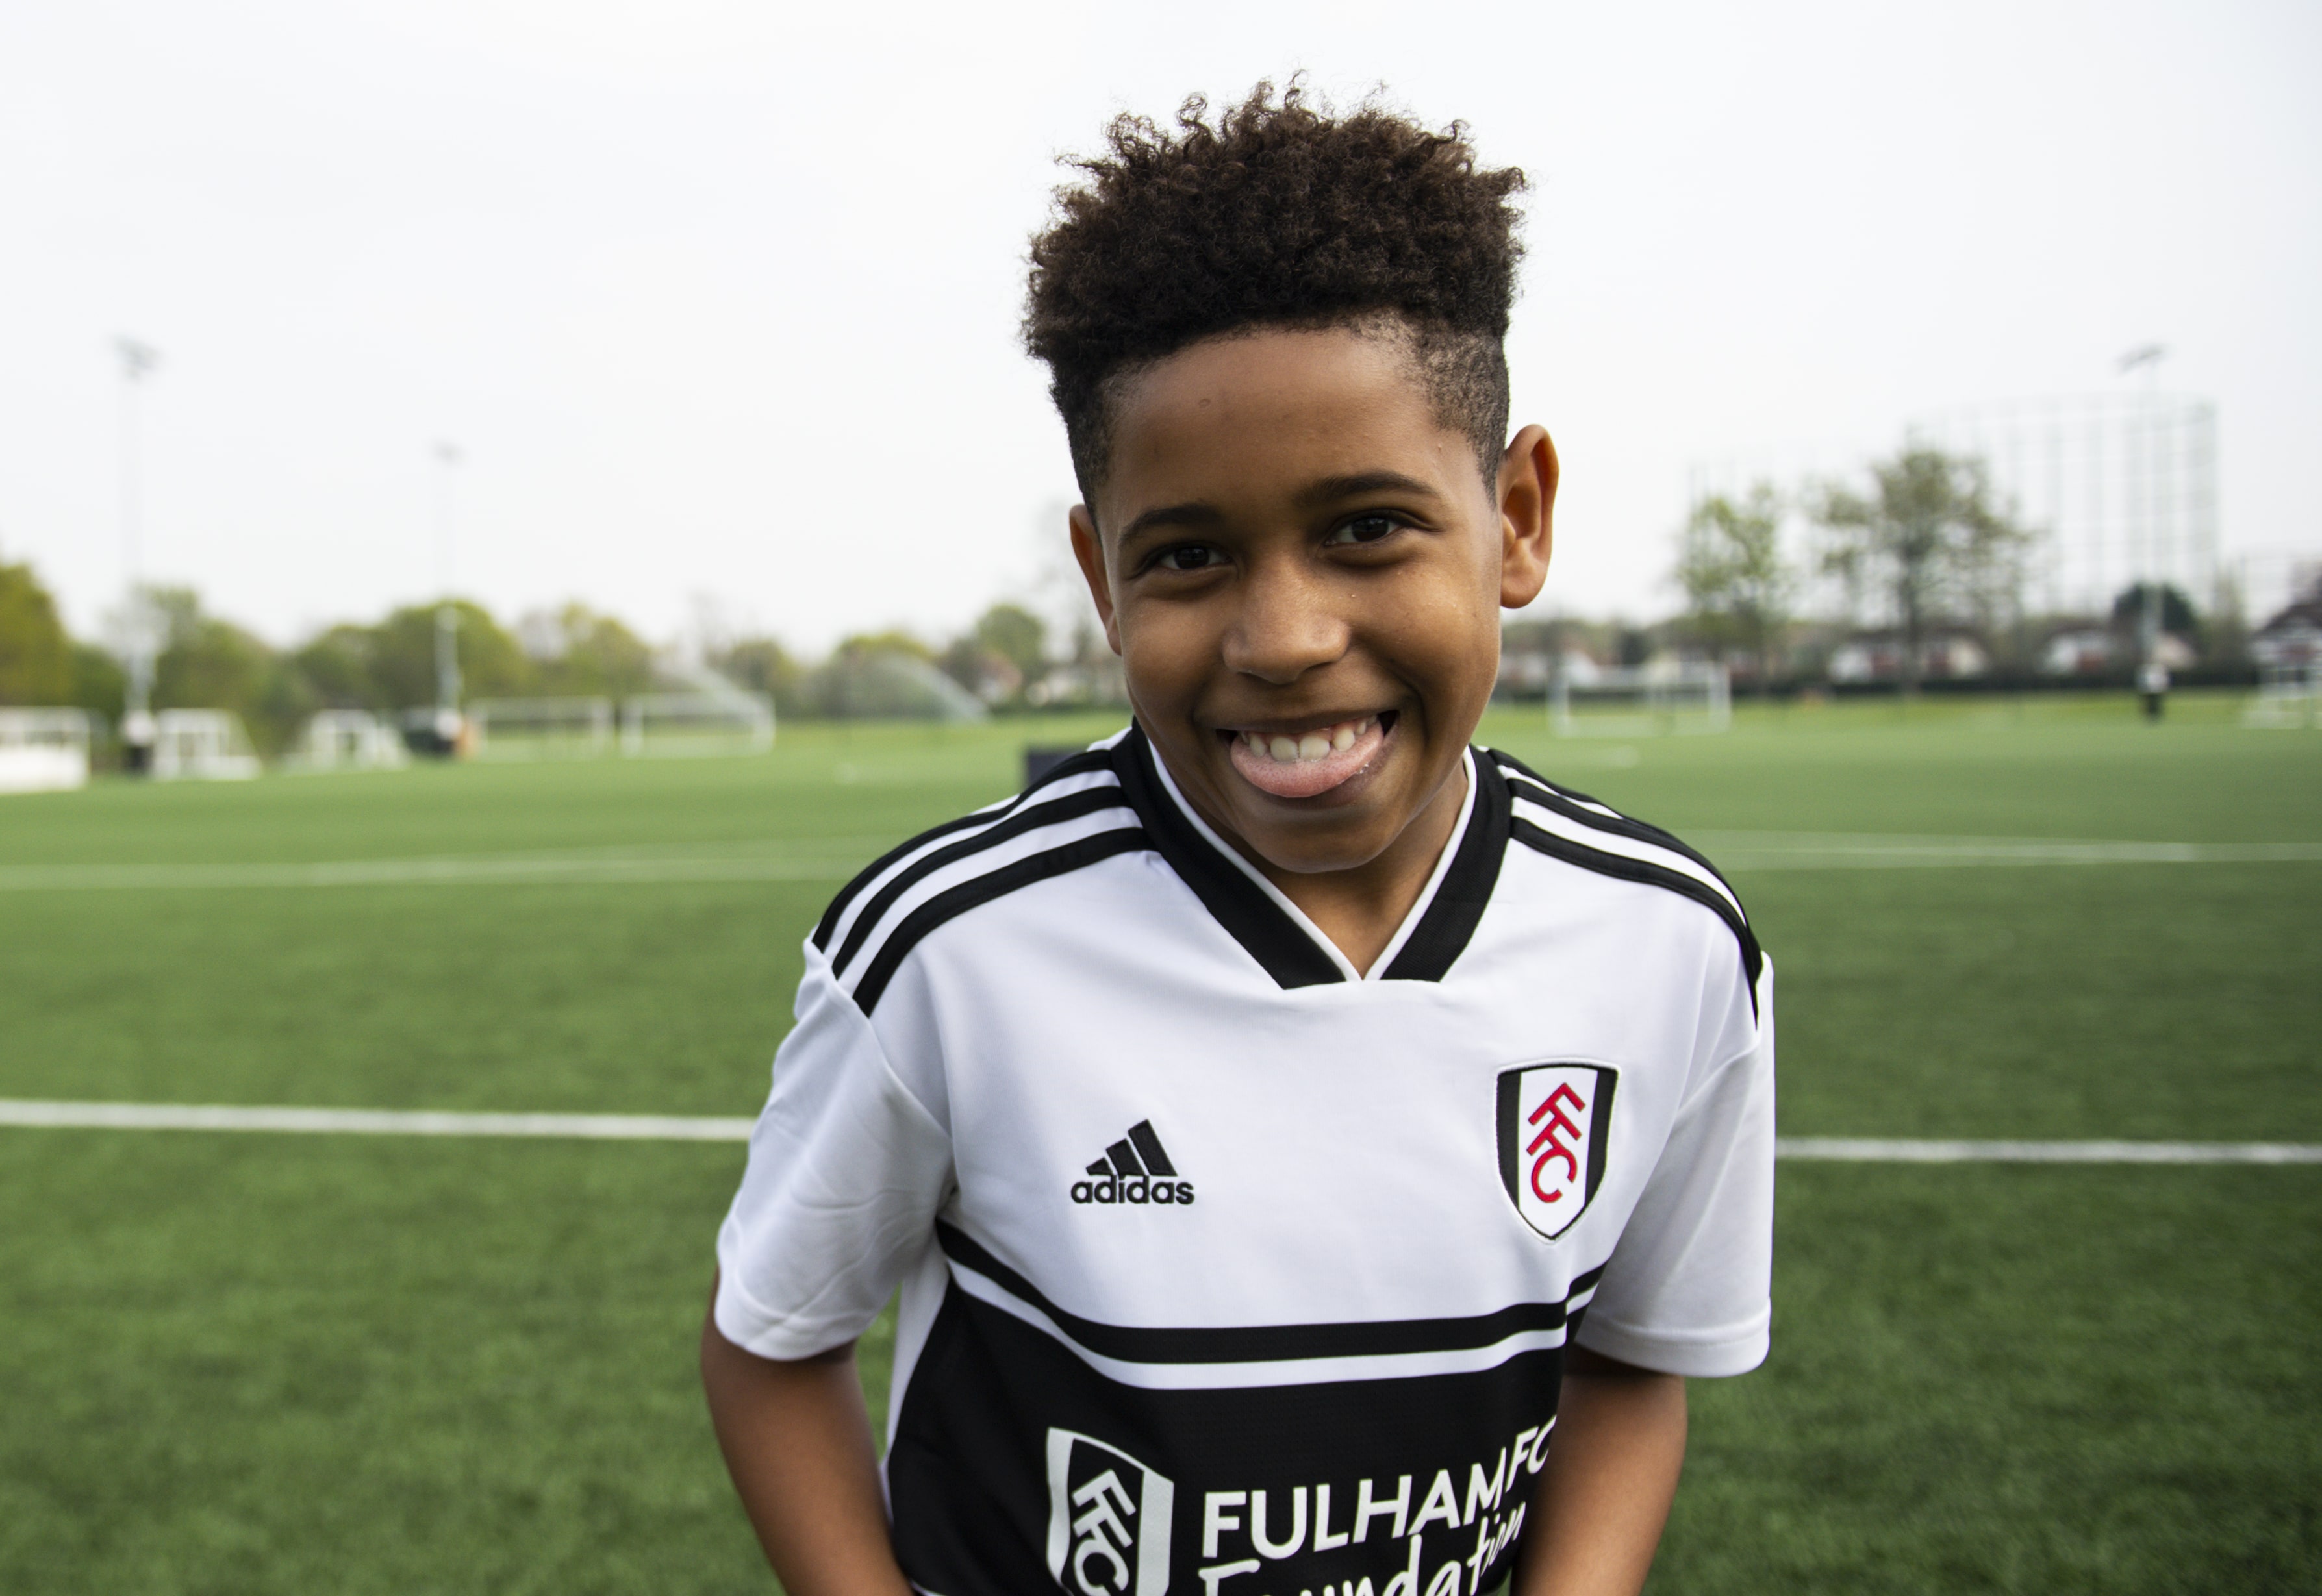 Contact – Fulham Football Club Foundation – Impact